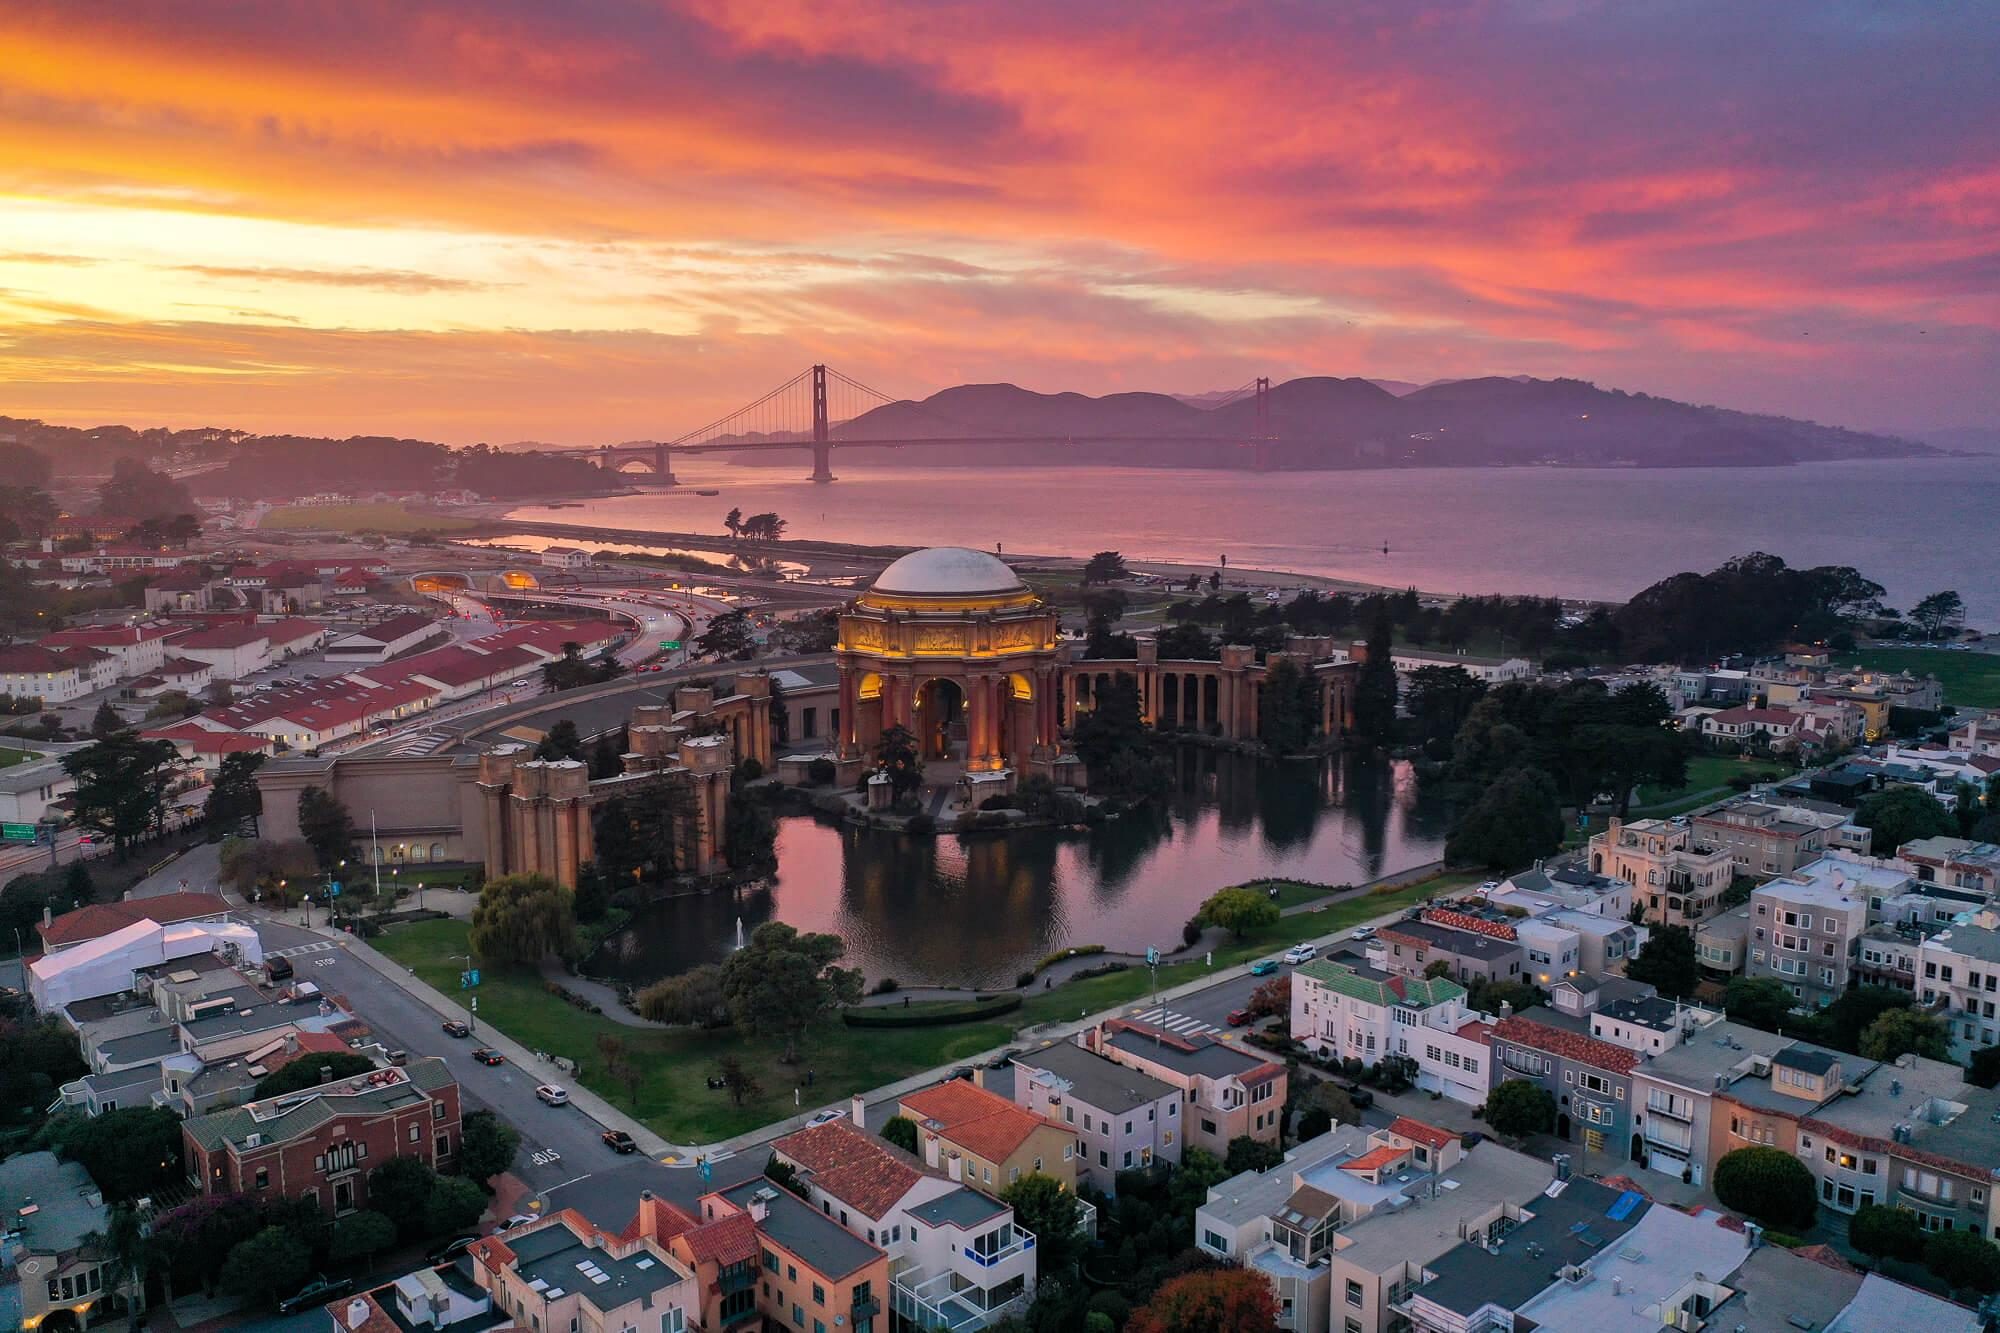 Sunset over the Palace of Fine Arts in the Marina District of San Francisco, California by Jake Landon Schwartz | photo by jake landon schwartz